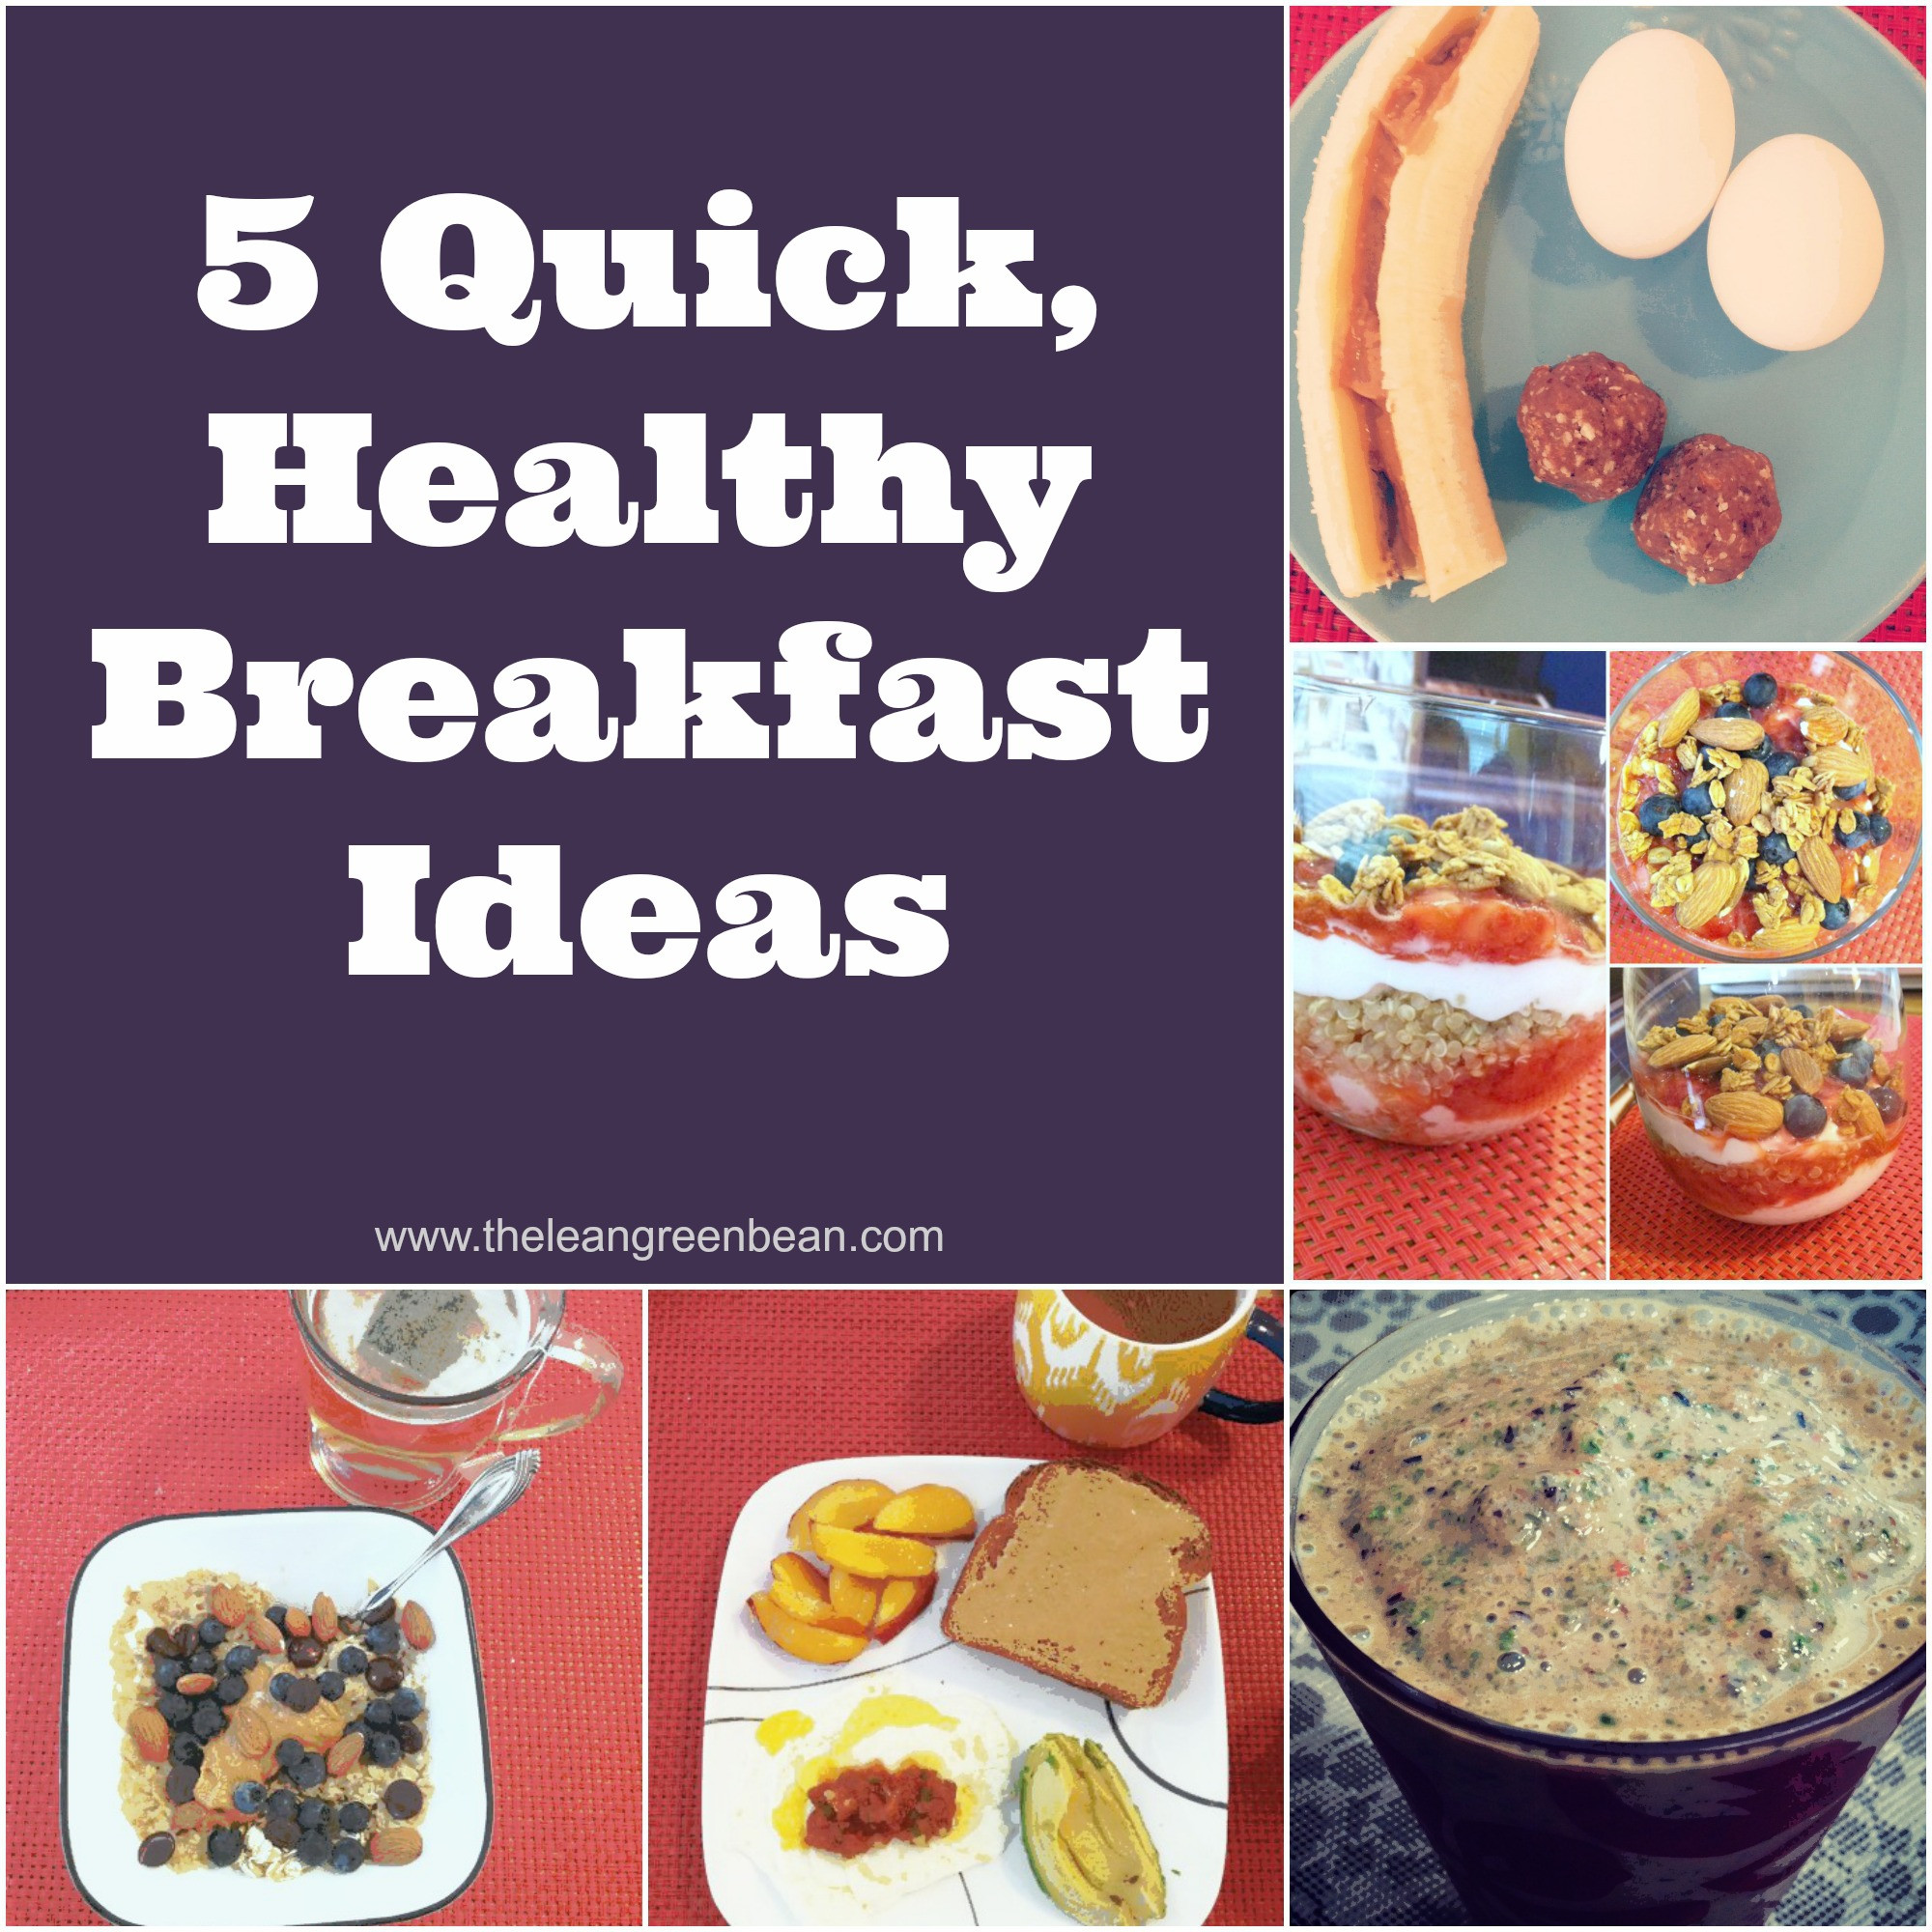 Quick Easy Healthy Breakfast
 5 Quick Healthy Breakfast Ideas from a Registered Dietitian